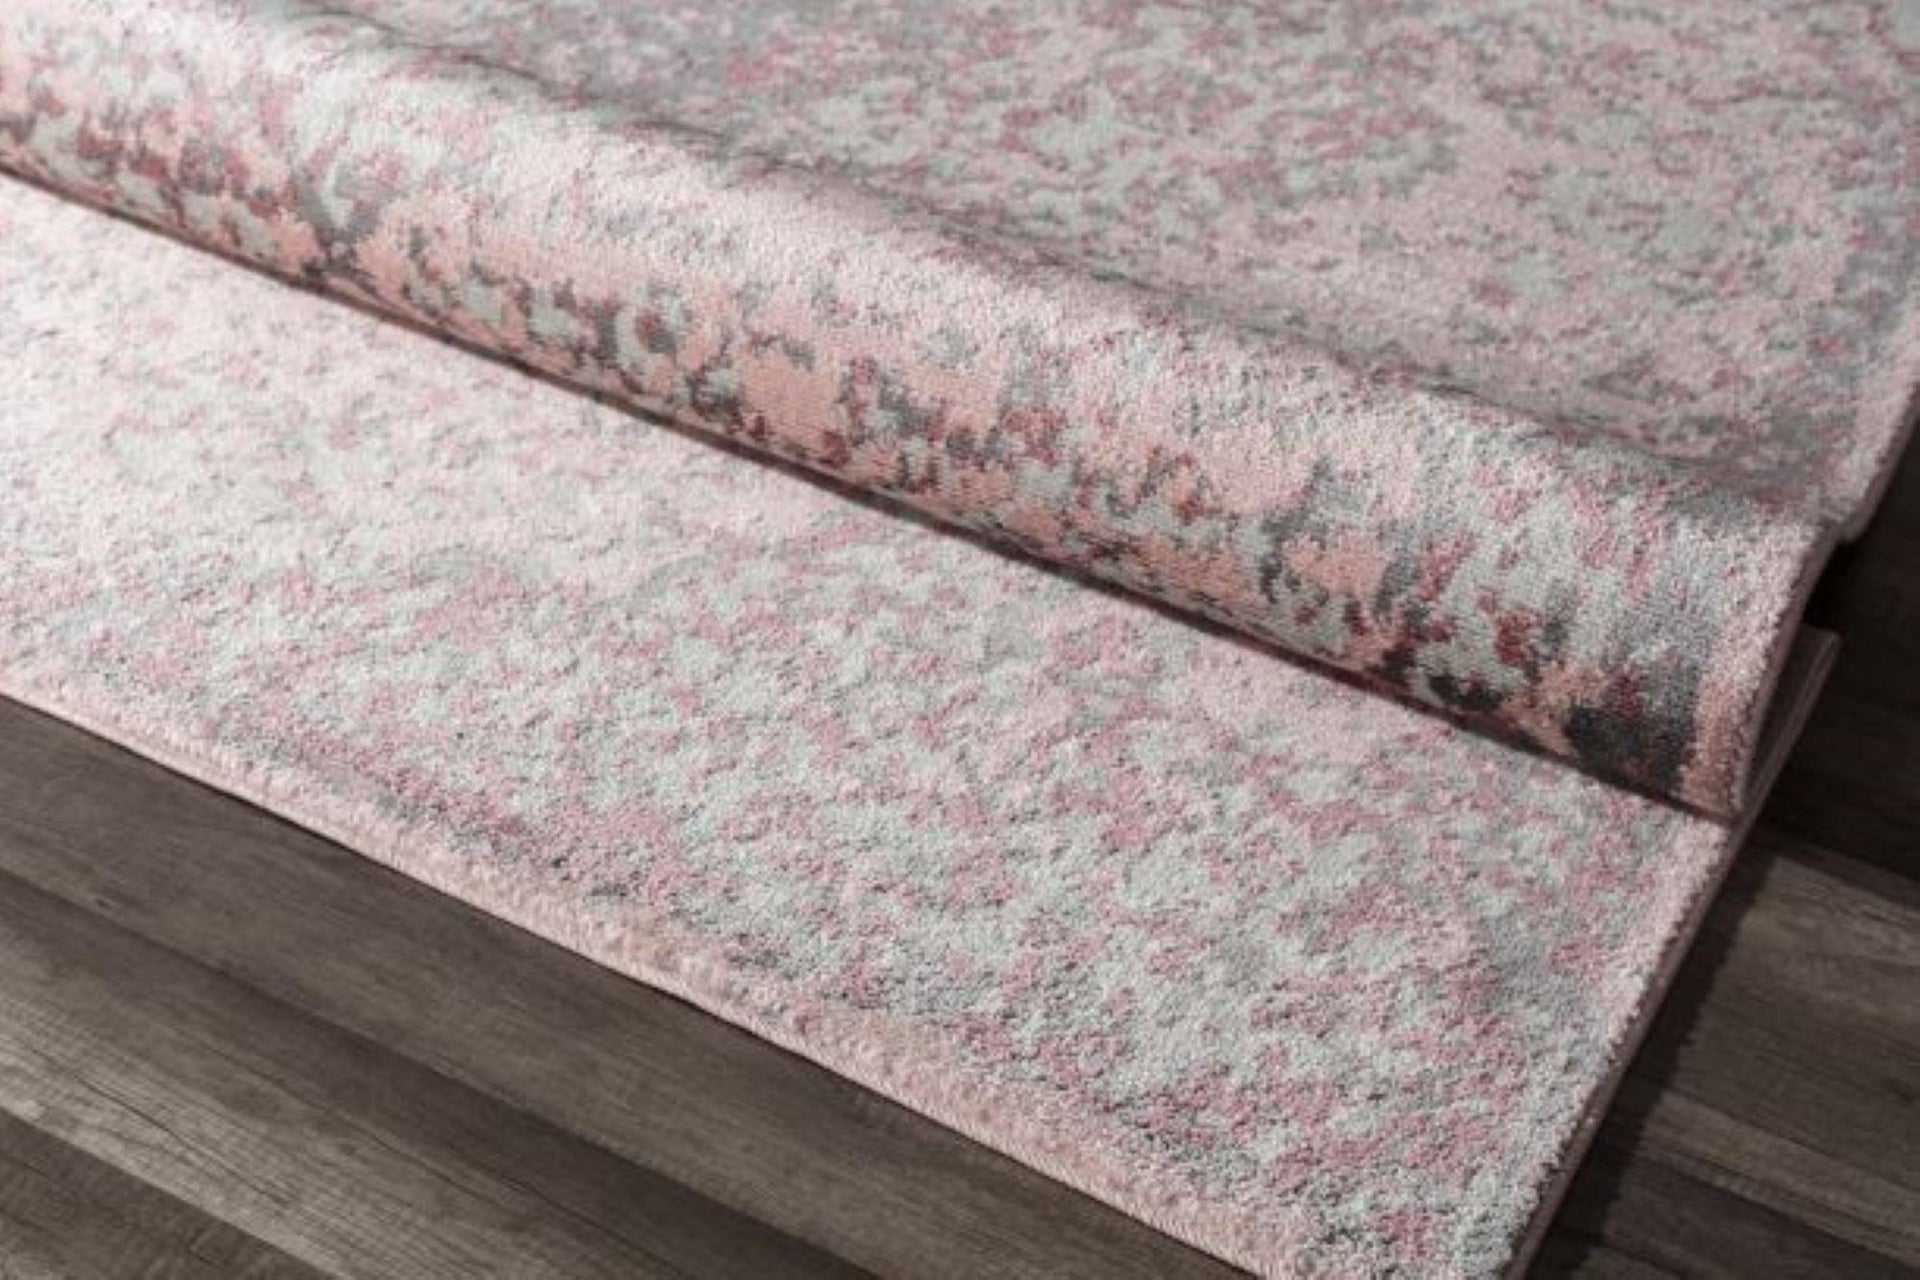 Little Seeds Serenity Saturated Rug Blush 5 x 7 - Blush